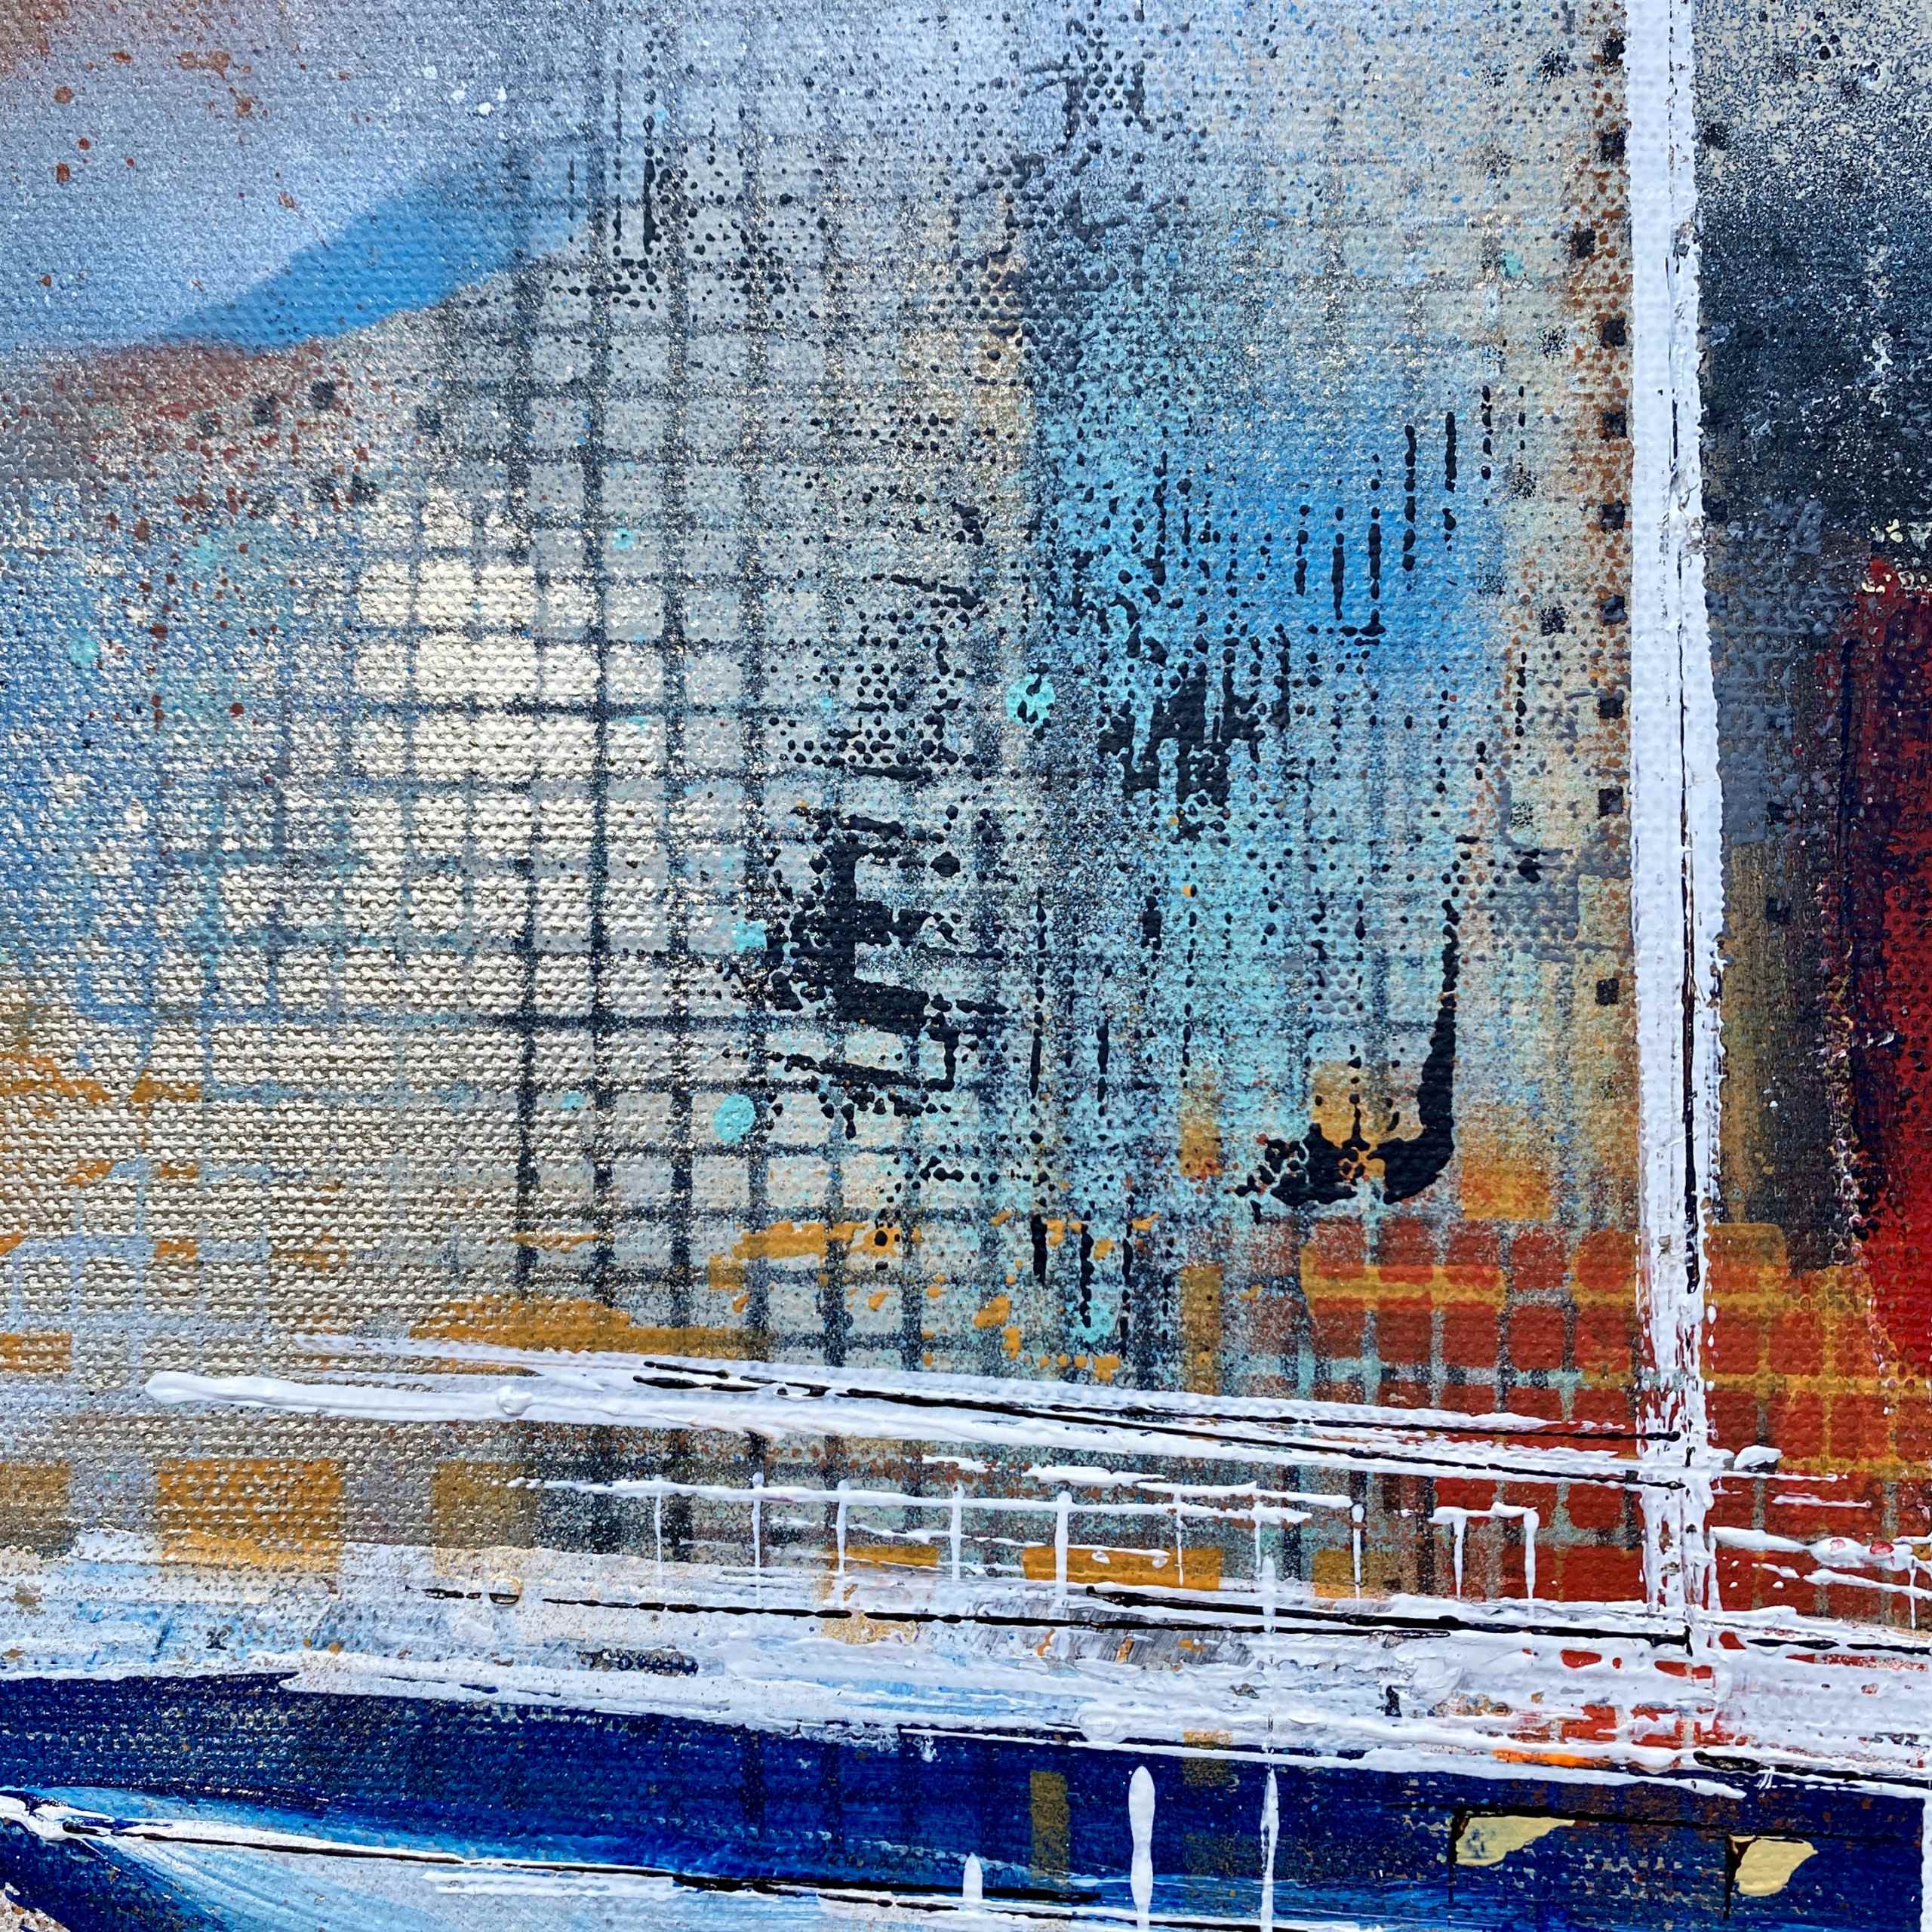 Detail of artwork "South Street Seaport" by Nina Groth